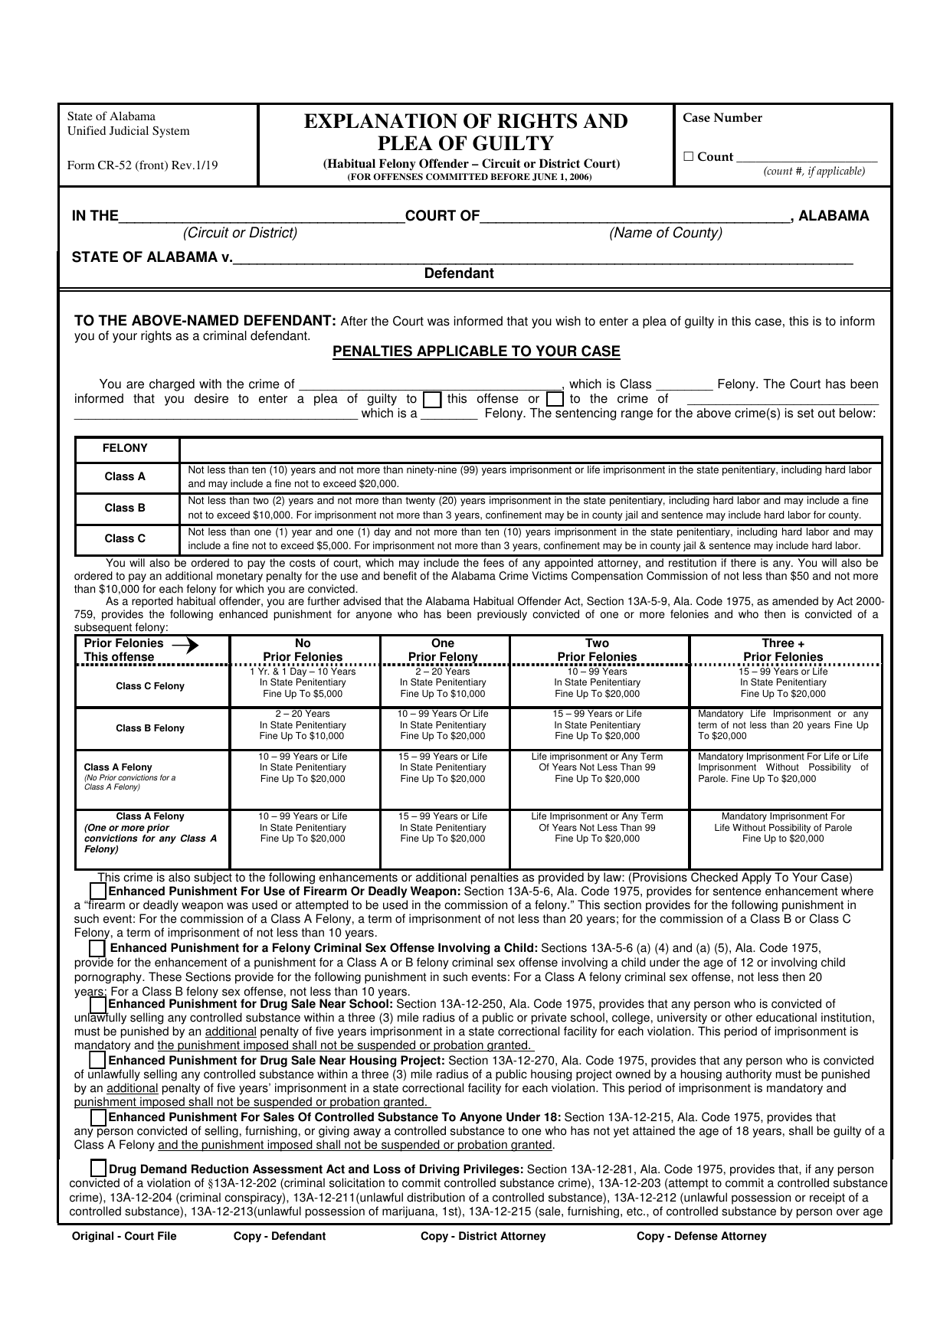 Form CR-52 Explanation of Rights and Plea of Guilty (Habitual Felony Offender - Circuit or District Court) (For Offenses Committed Before June 1, 2006) - Alabama, Page 1